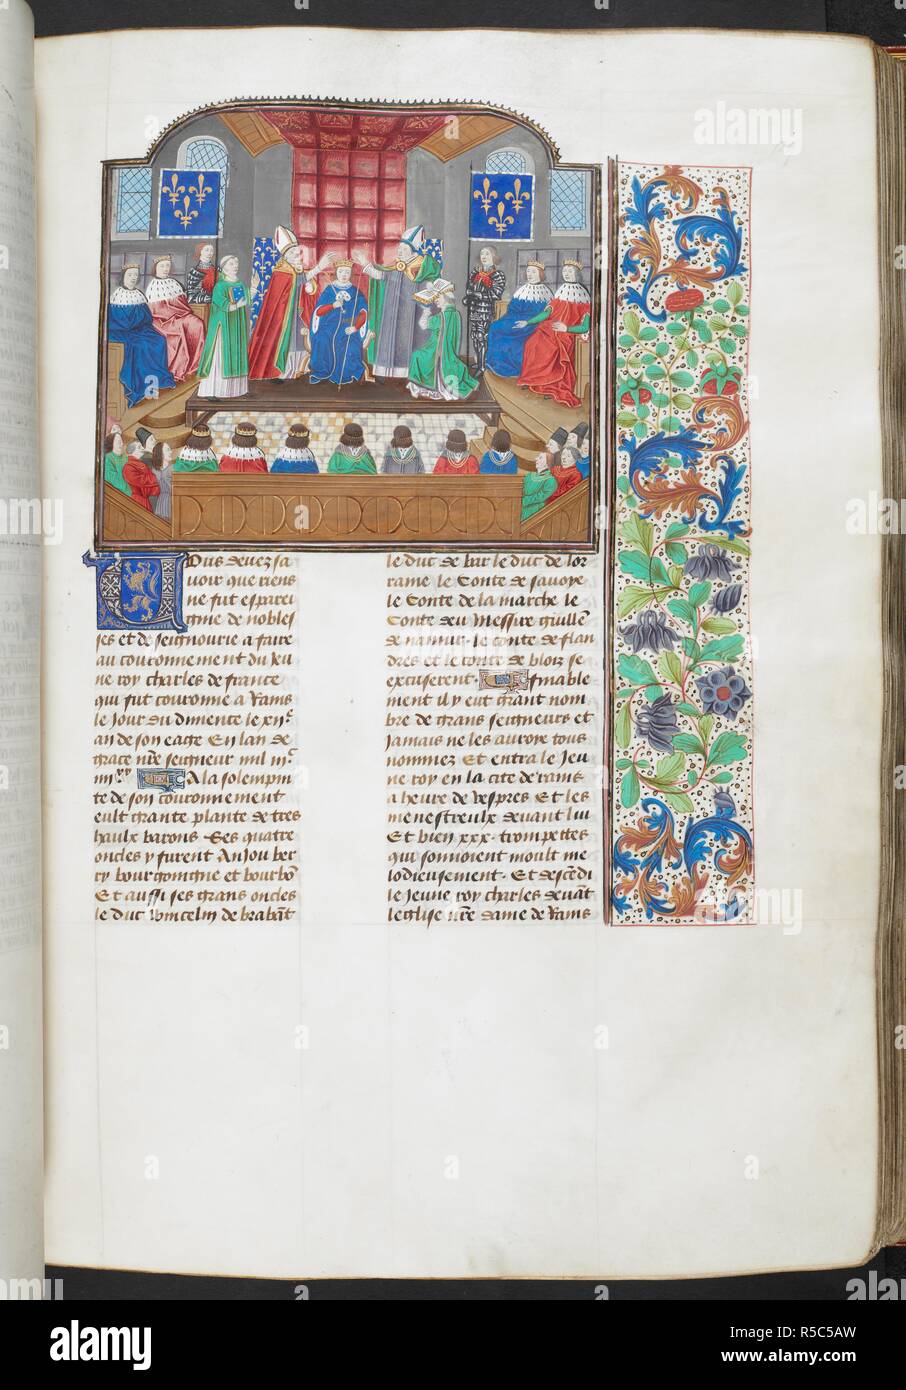 The coronation of Emperor Charles VI. Text and floral border. Chroniques. Netherlands, S. Last quarter of the 15th century, before 1483. Source: Royal 18 E. I f.129. Language: French. Author: FROISSART, JEAN. Stock Photo